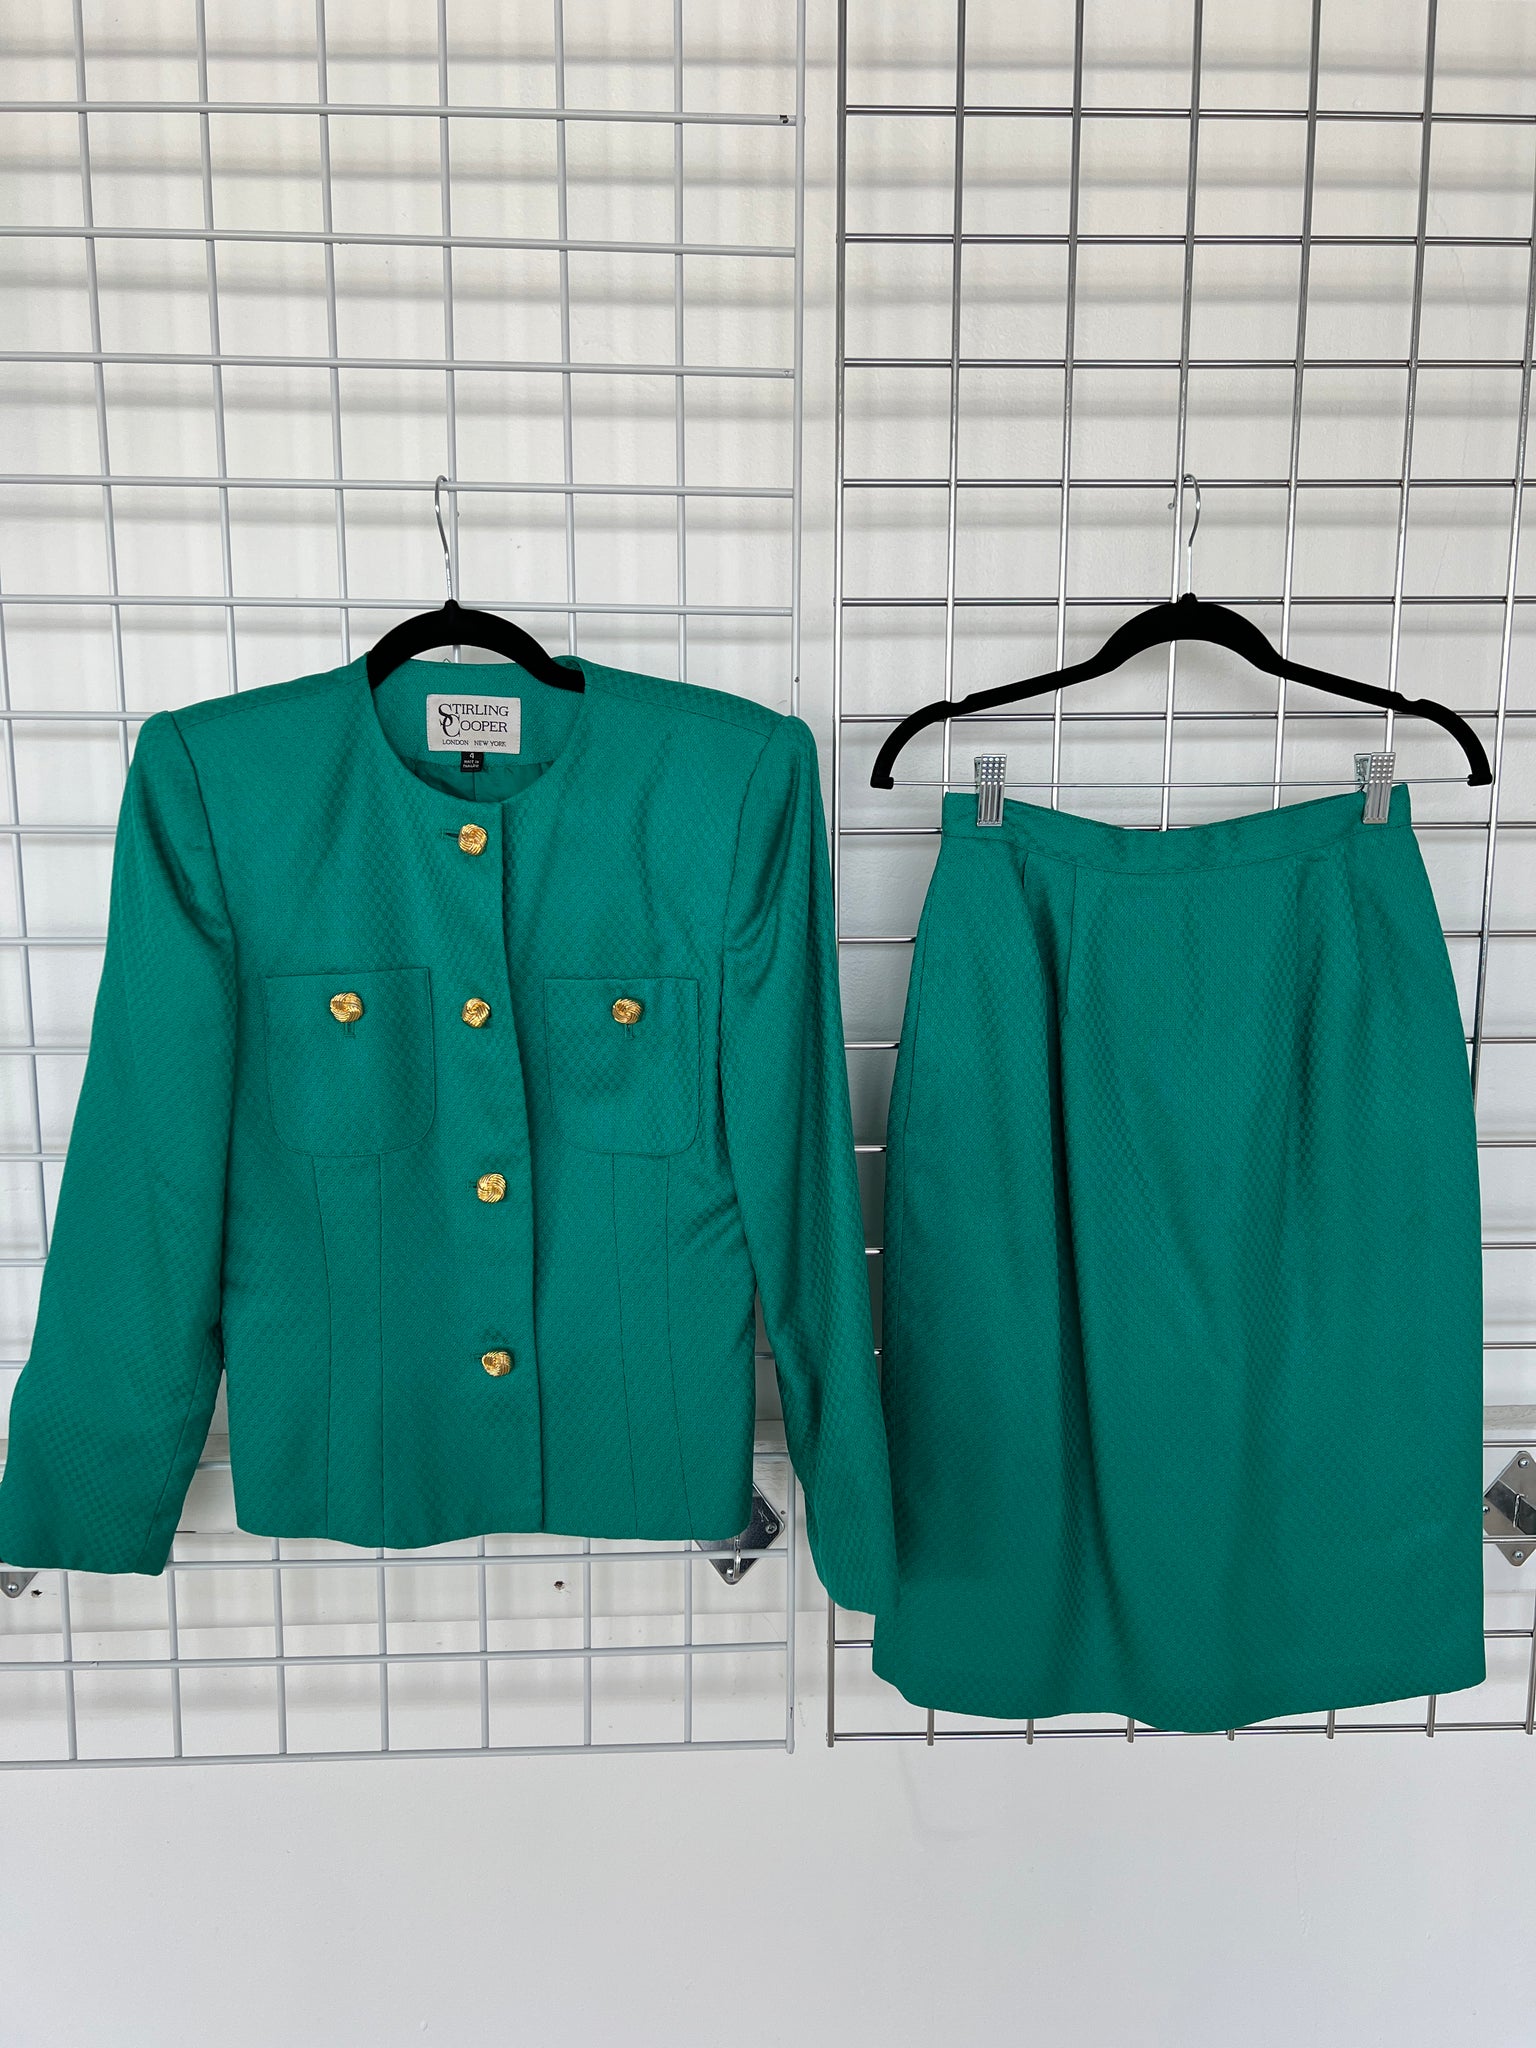 1990's 2 PIECE- SKIRT SUIT- Sterling cooper teal w/ gold buttons